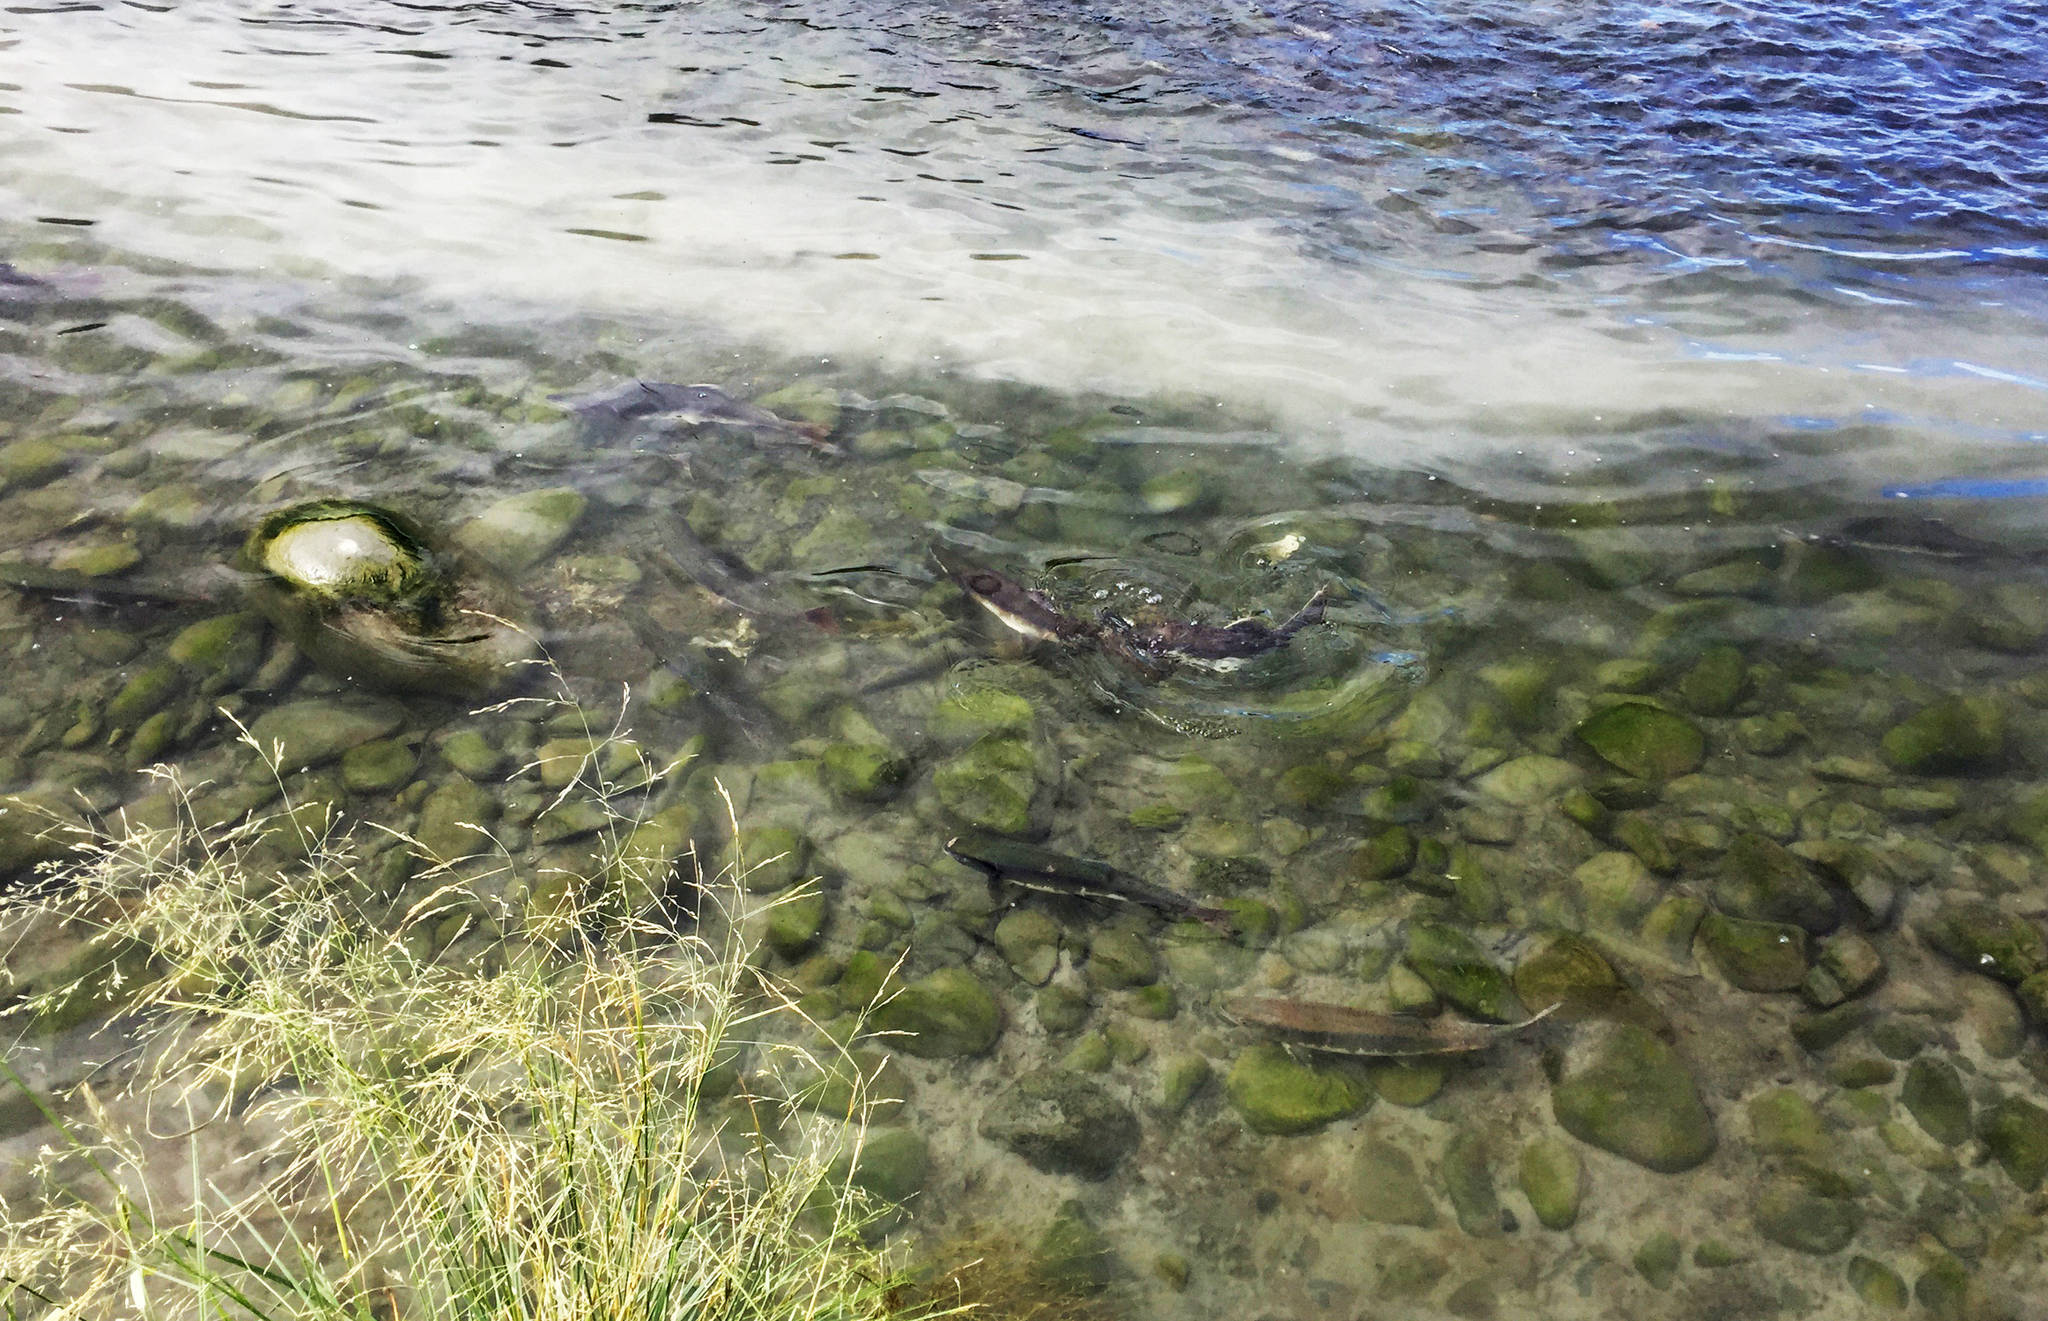 Pink salmon mill in the shallows of Resurrection Creek near its confluence with Cook Inlet on Sunday, Aug. 13, 2017 in Hope, Alaska. (Photo by Elizabeth Earl/Peninsula Clarion, file)